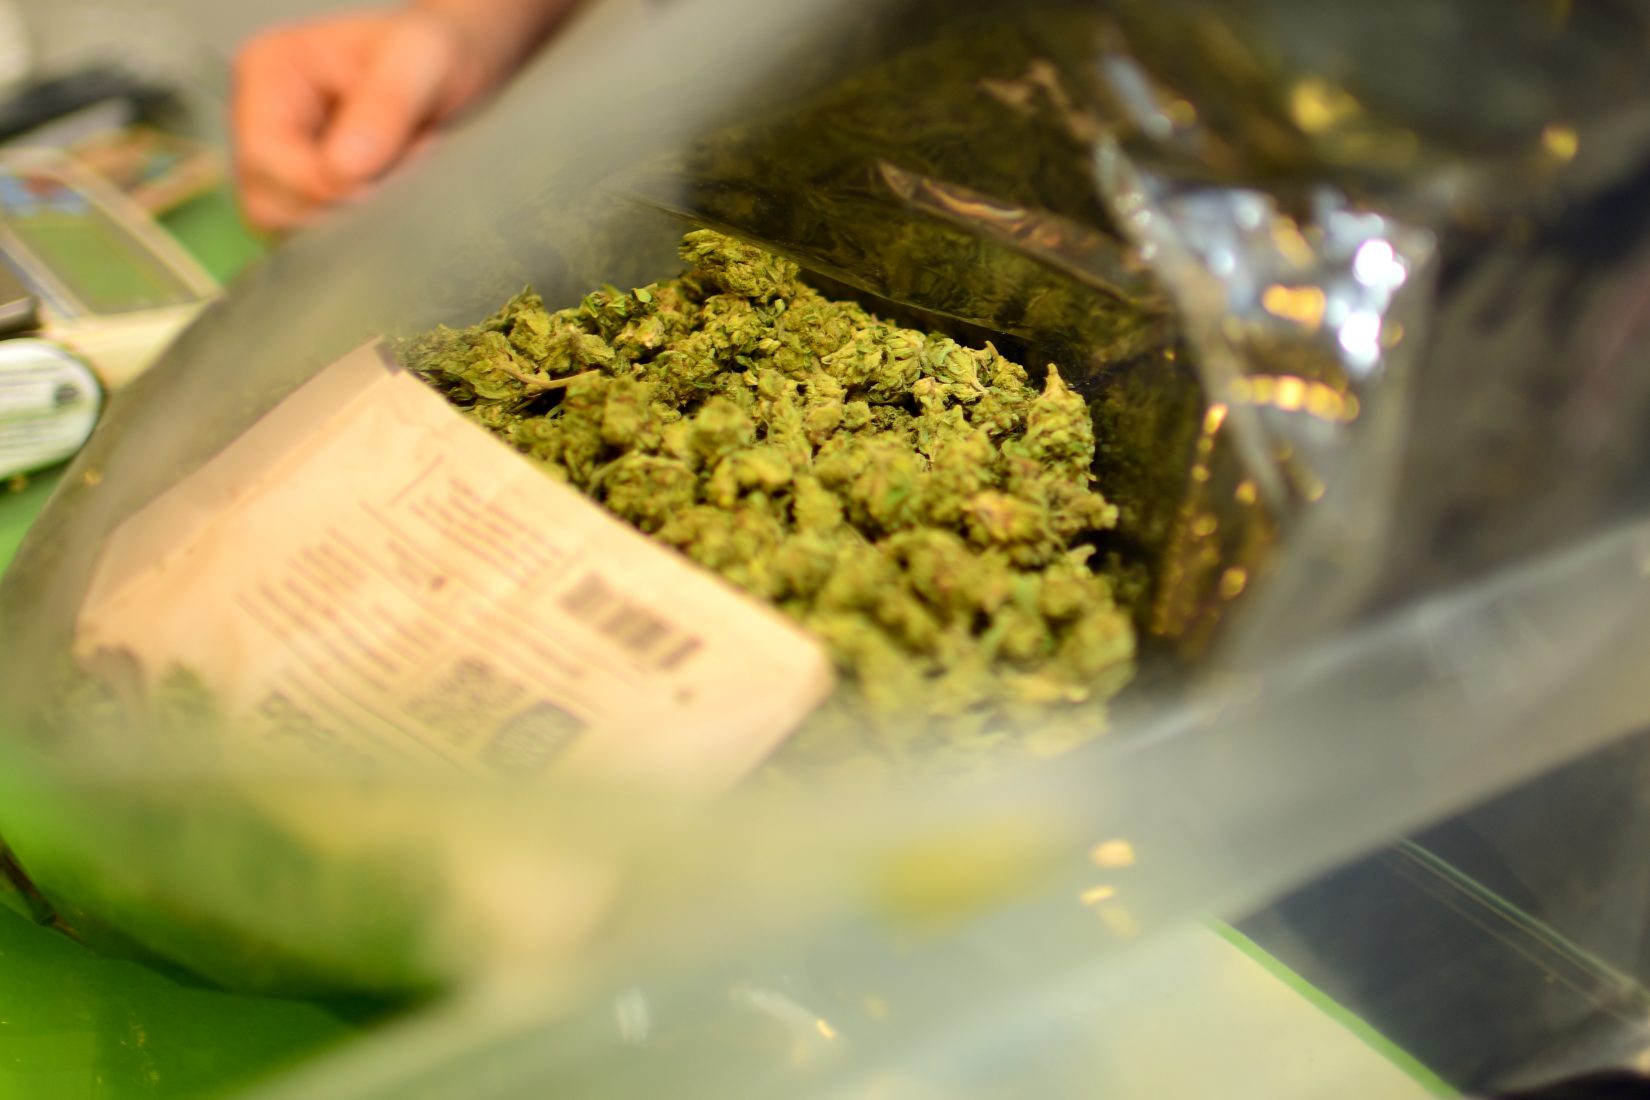 Pounds of cured marijuana are prepped before being packaged for sale at the Outliers Collective in San Diego County, California in October 2016. (Vince Chandler, The Cannabist)